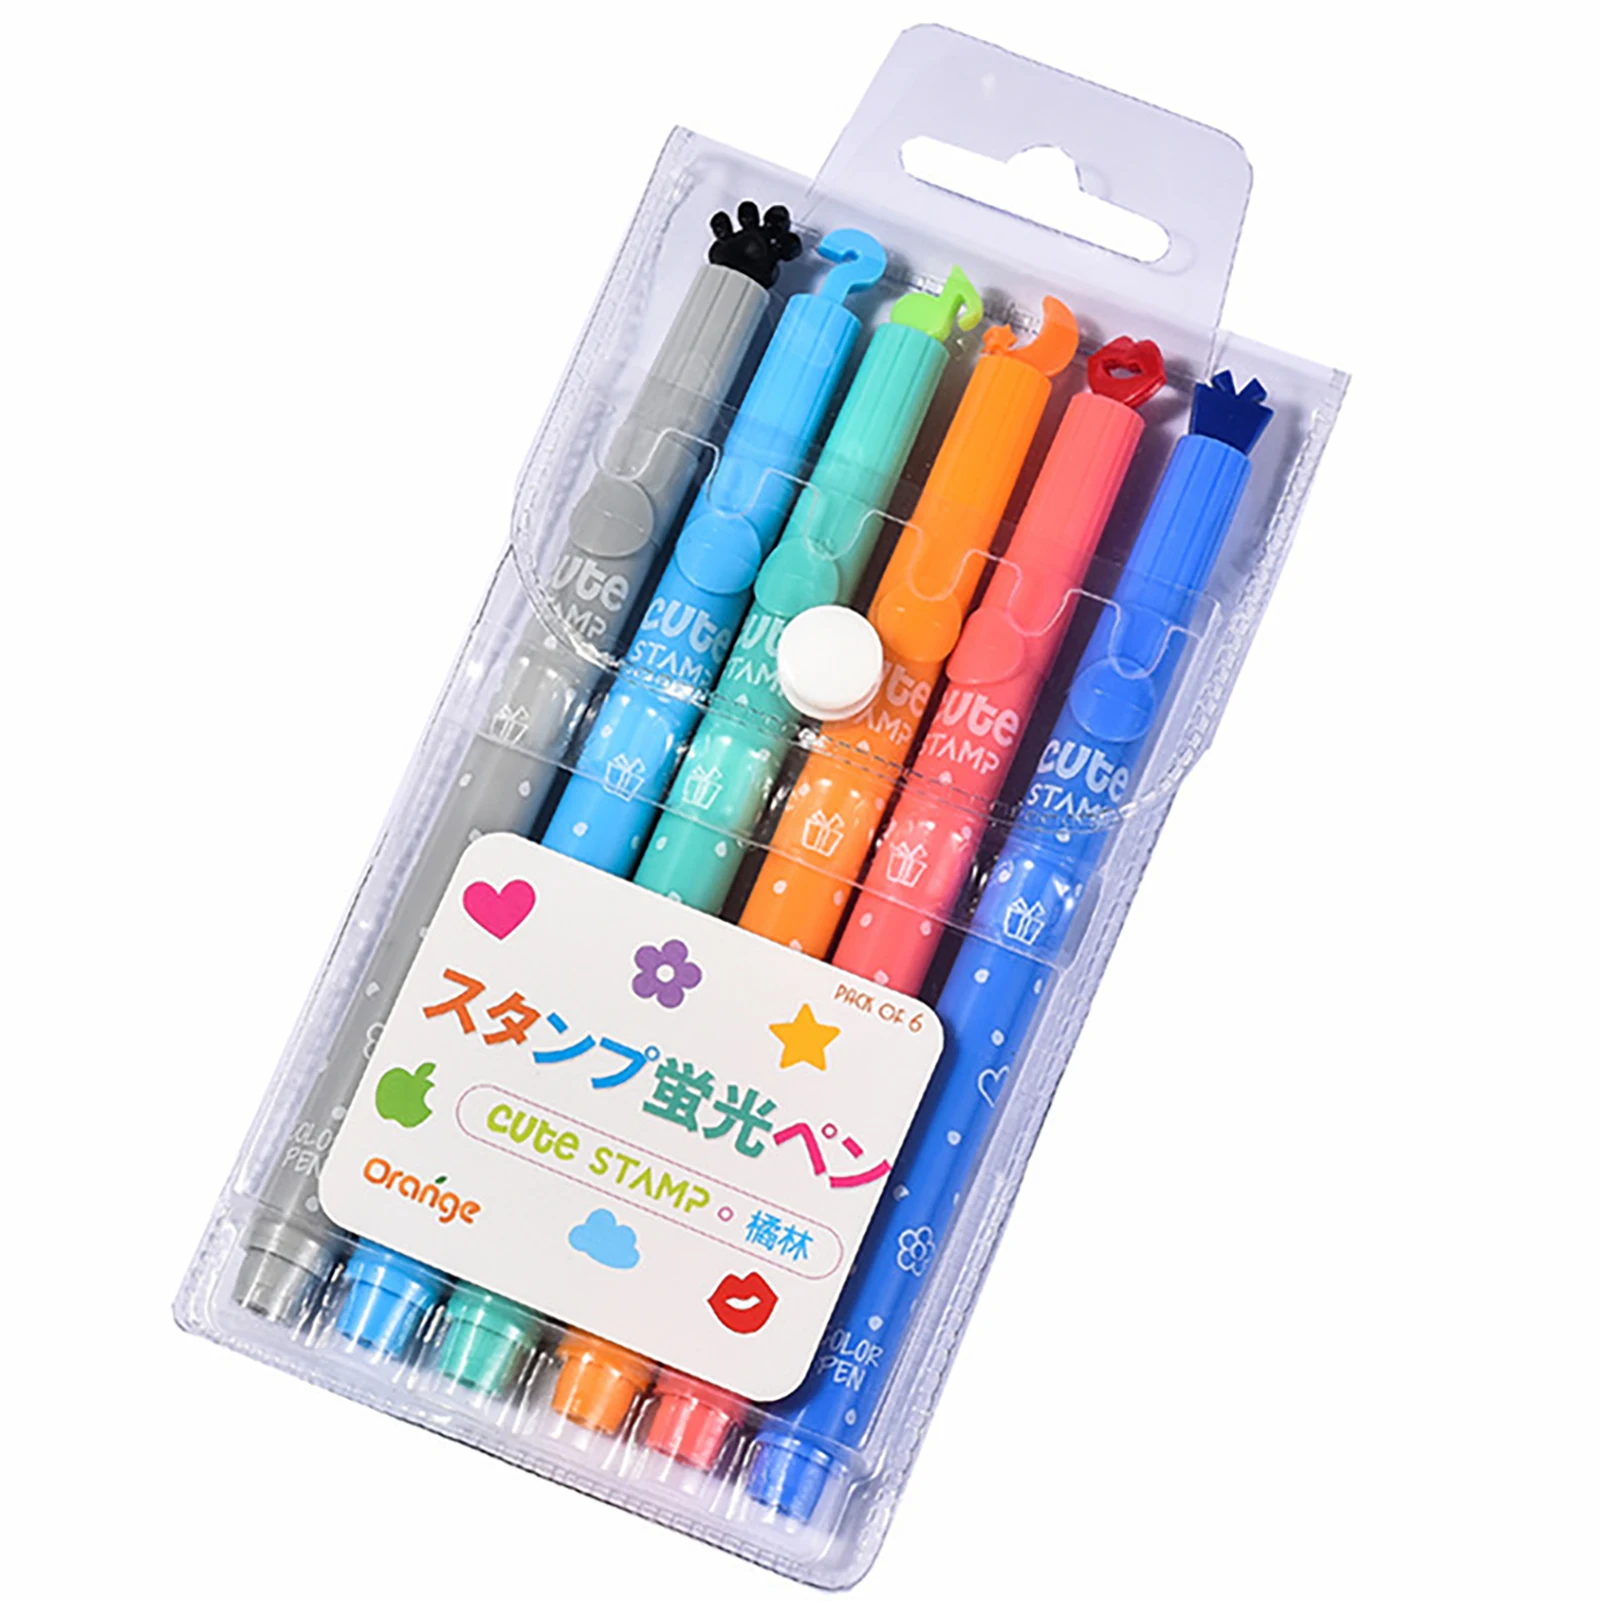 

Stamp Highlighters Single Head Marker with Different Stamp Shapes Highlighters for Coloring Books School Projects